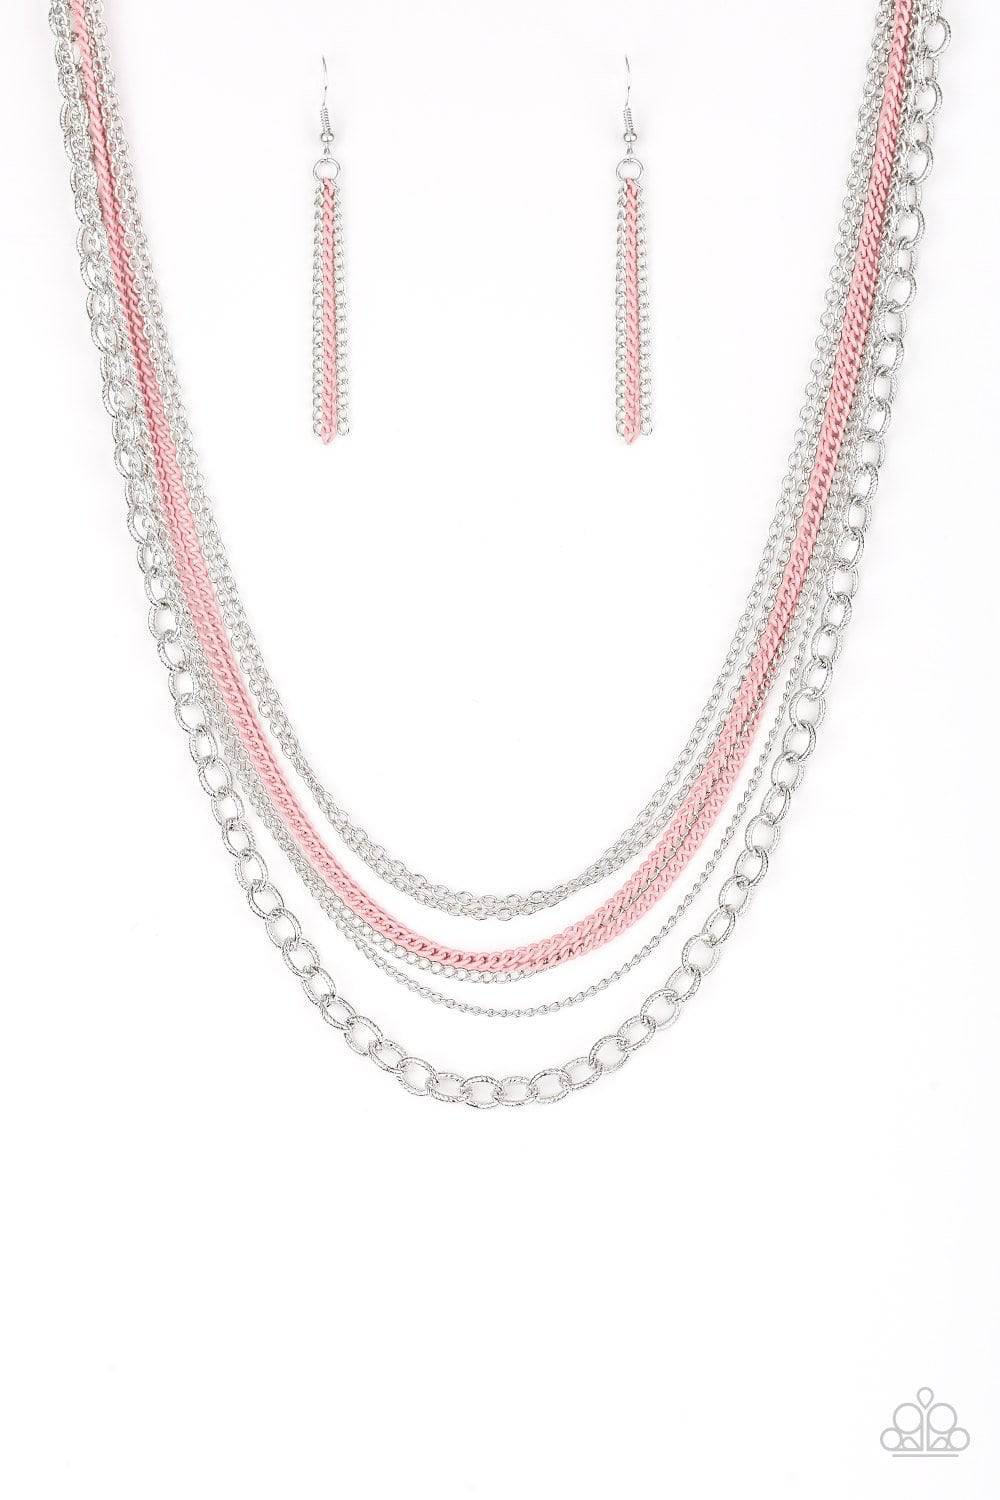 Intensely Industrial - Pink Chain Necklace - Paparazzi Accessories - GlaMarous Titi Jewels